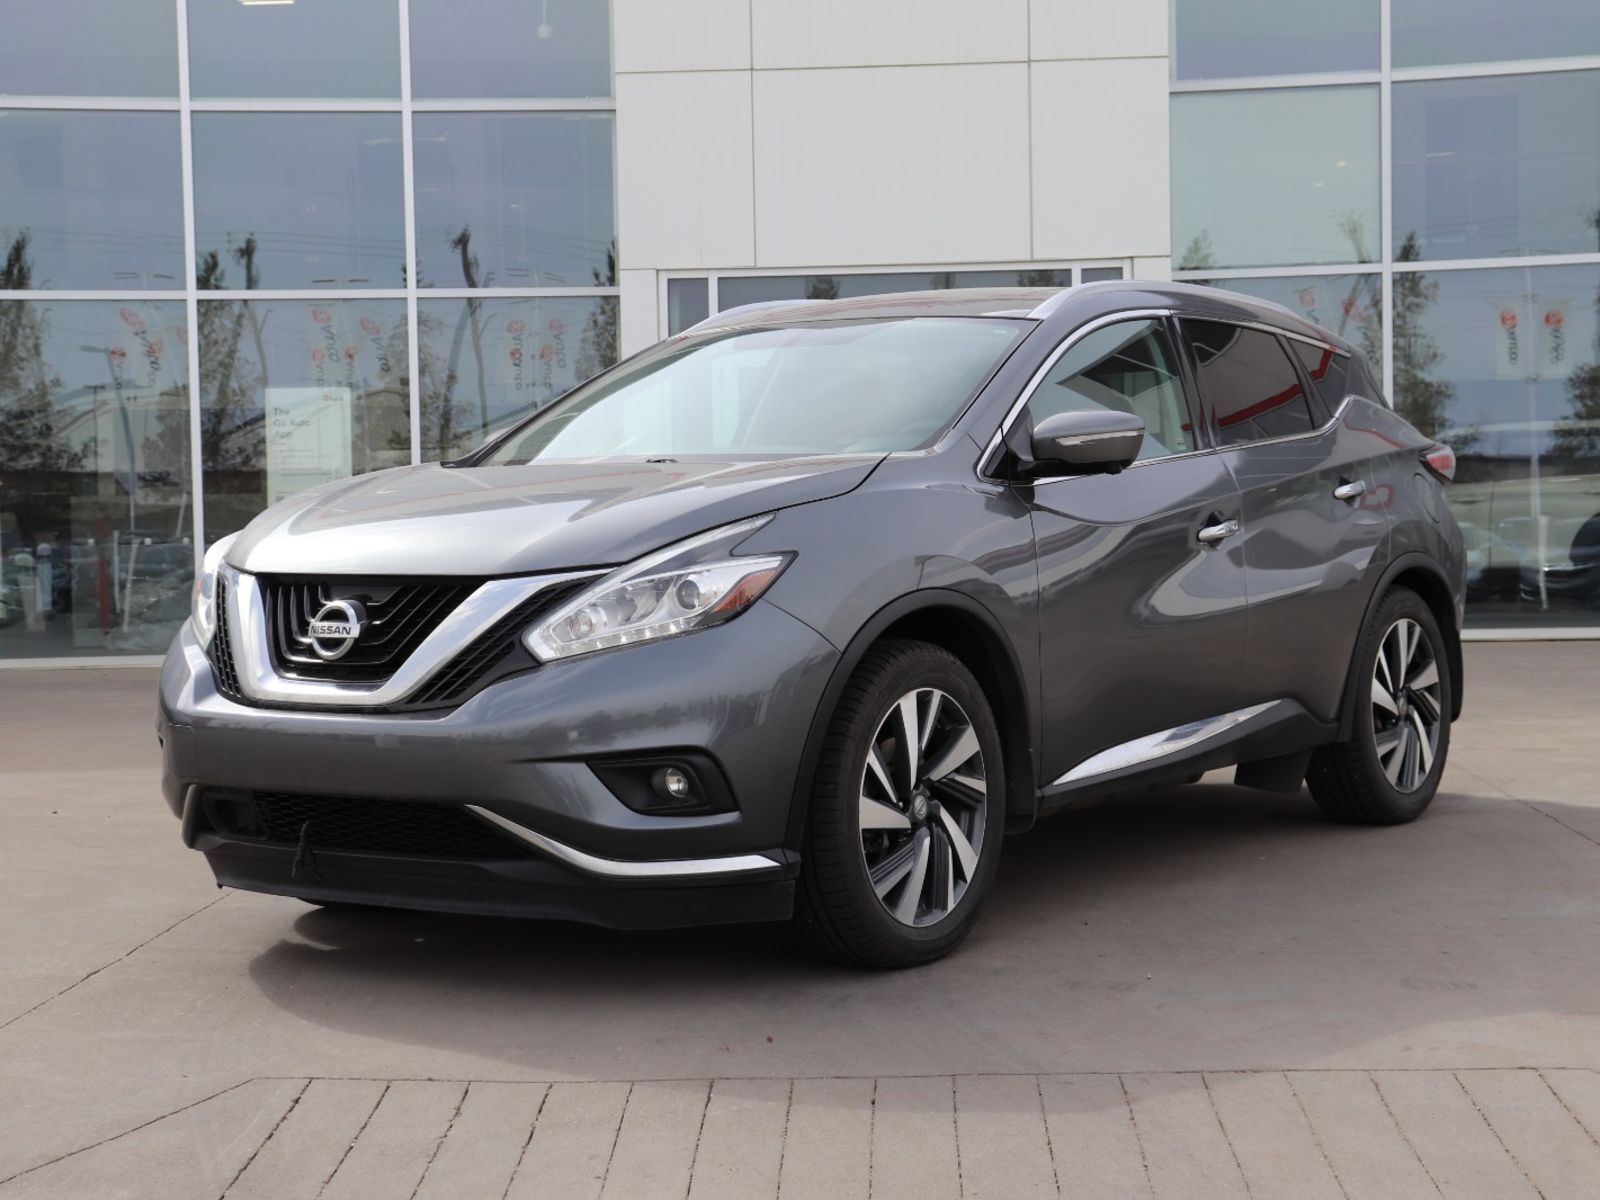 2015 Nissan Murano PLATINUM AWD ONE OWNER NO ACCIDENTS!